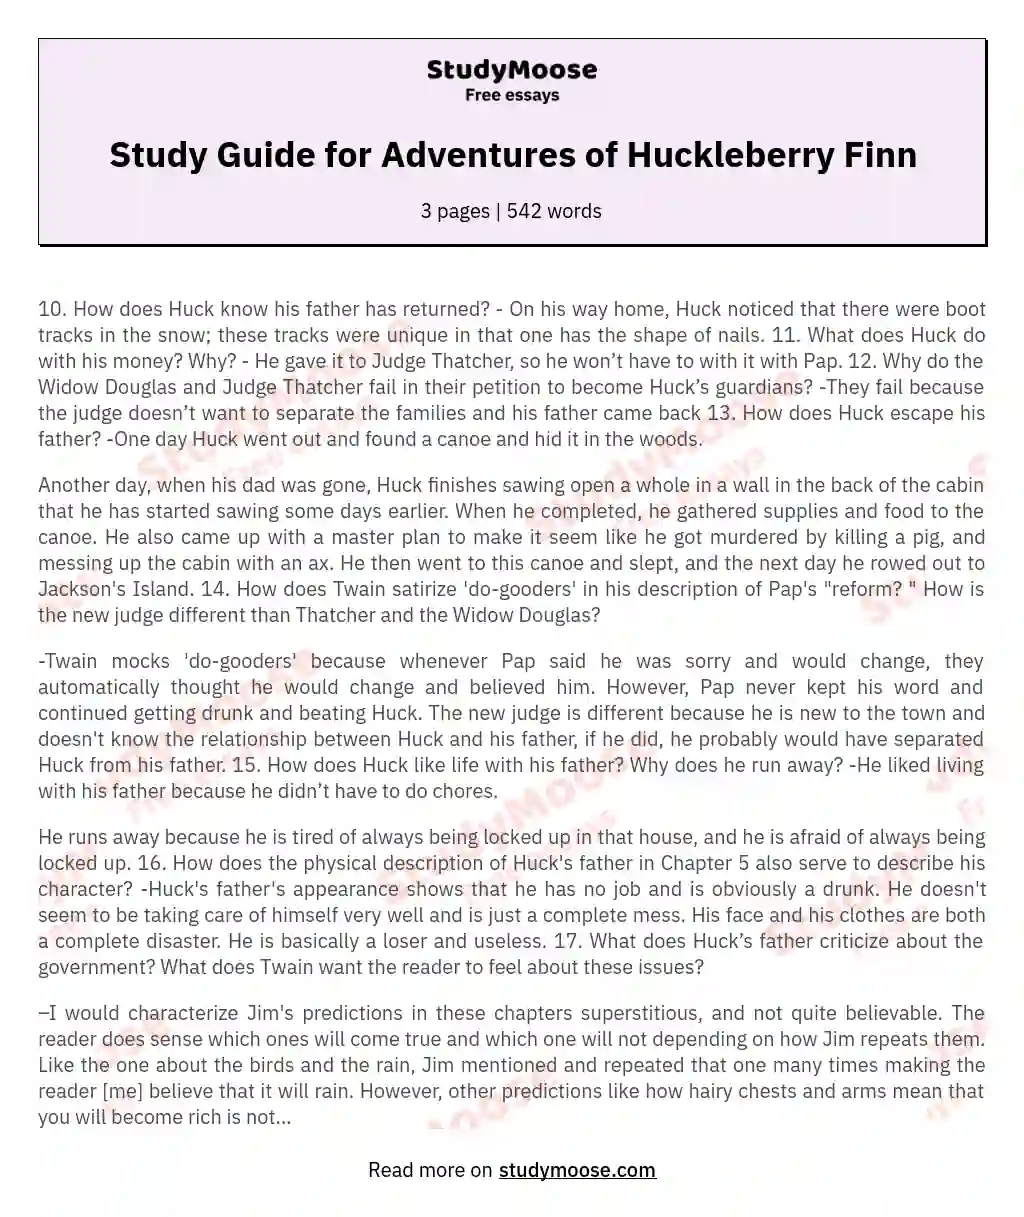 Study Guide for Adventures of Huckleberry Finn